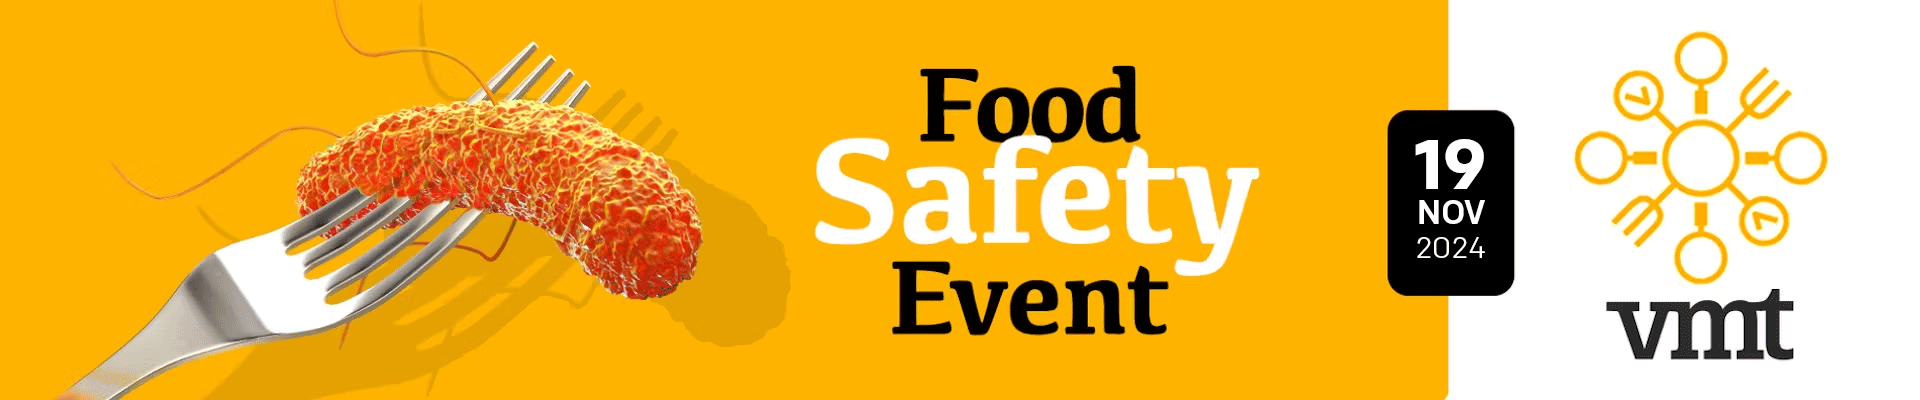 Food Safety Event 2024